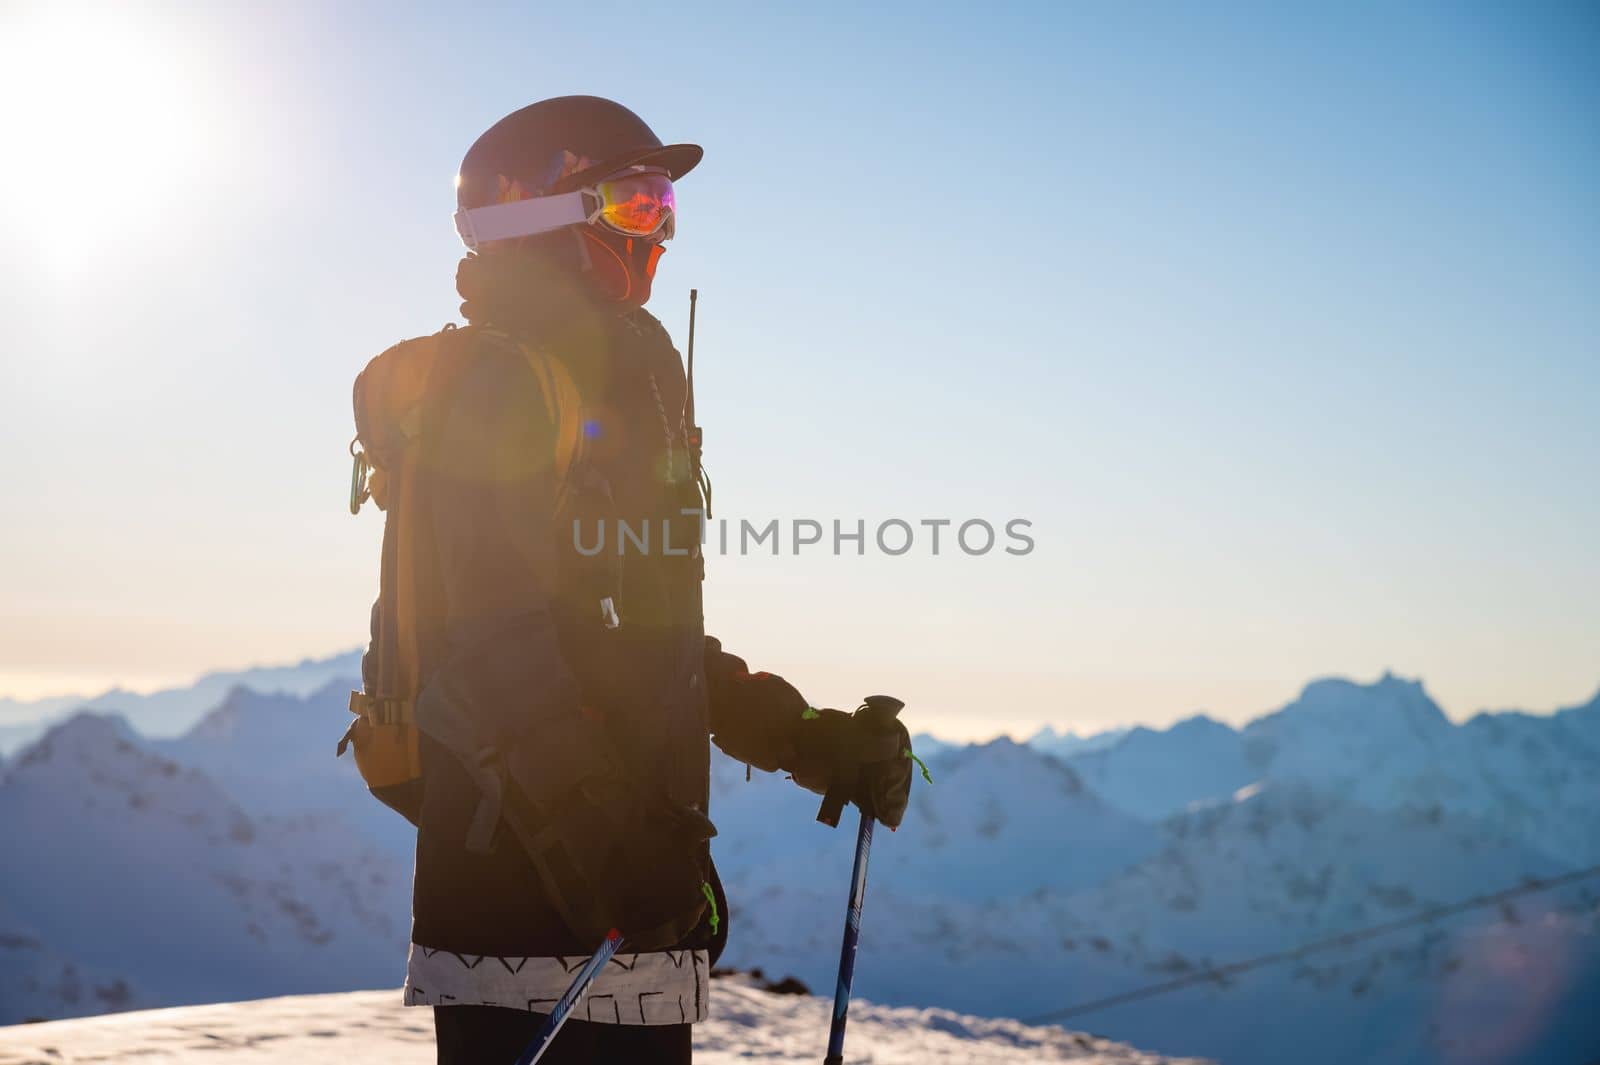 Side view of a snowboarder or skier against the backdrop of mountains at a ski resort in bright sunlight. Portrait of a rider with a backpack ready to go off-piste.